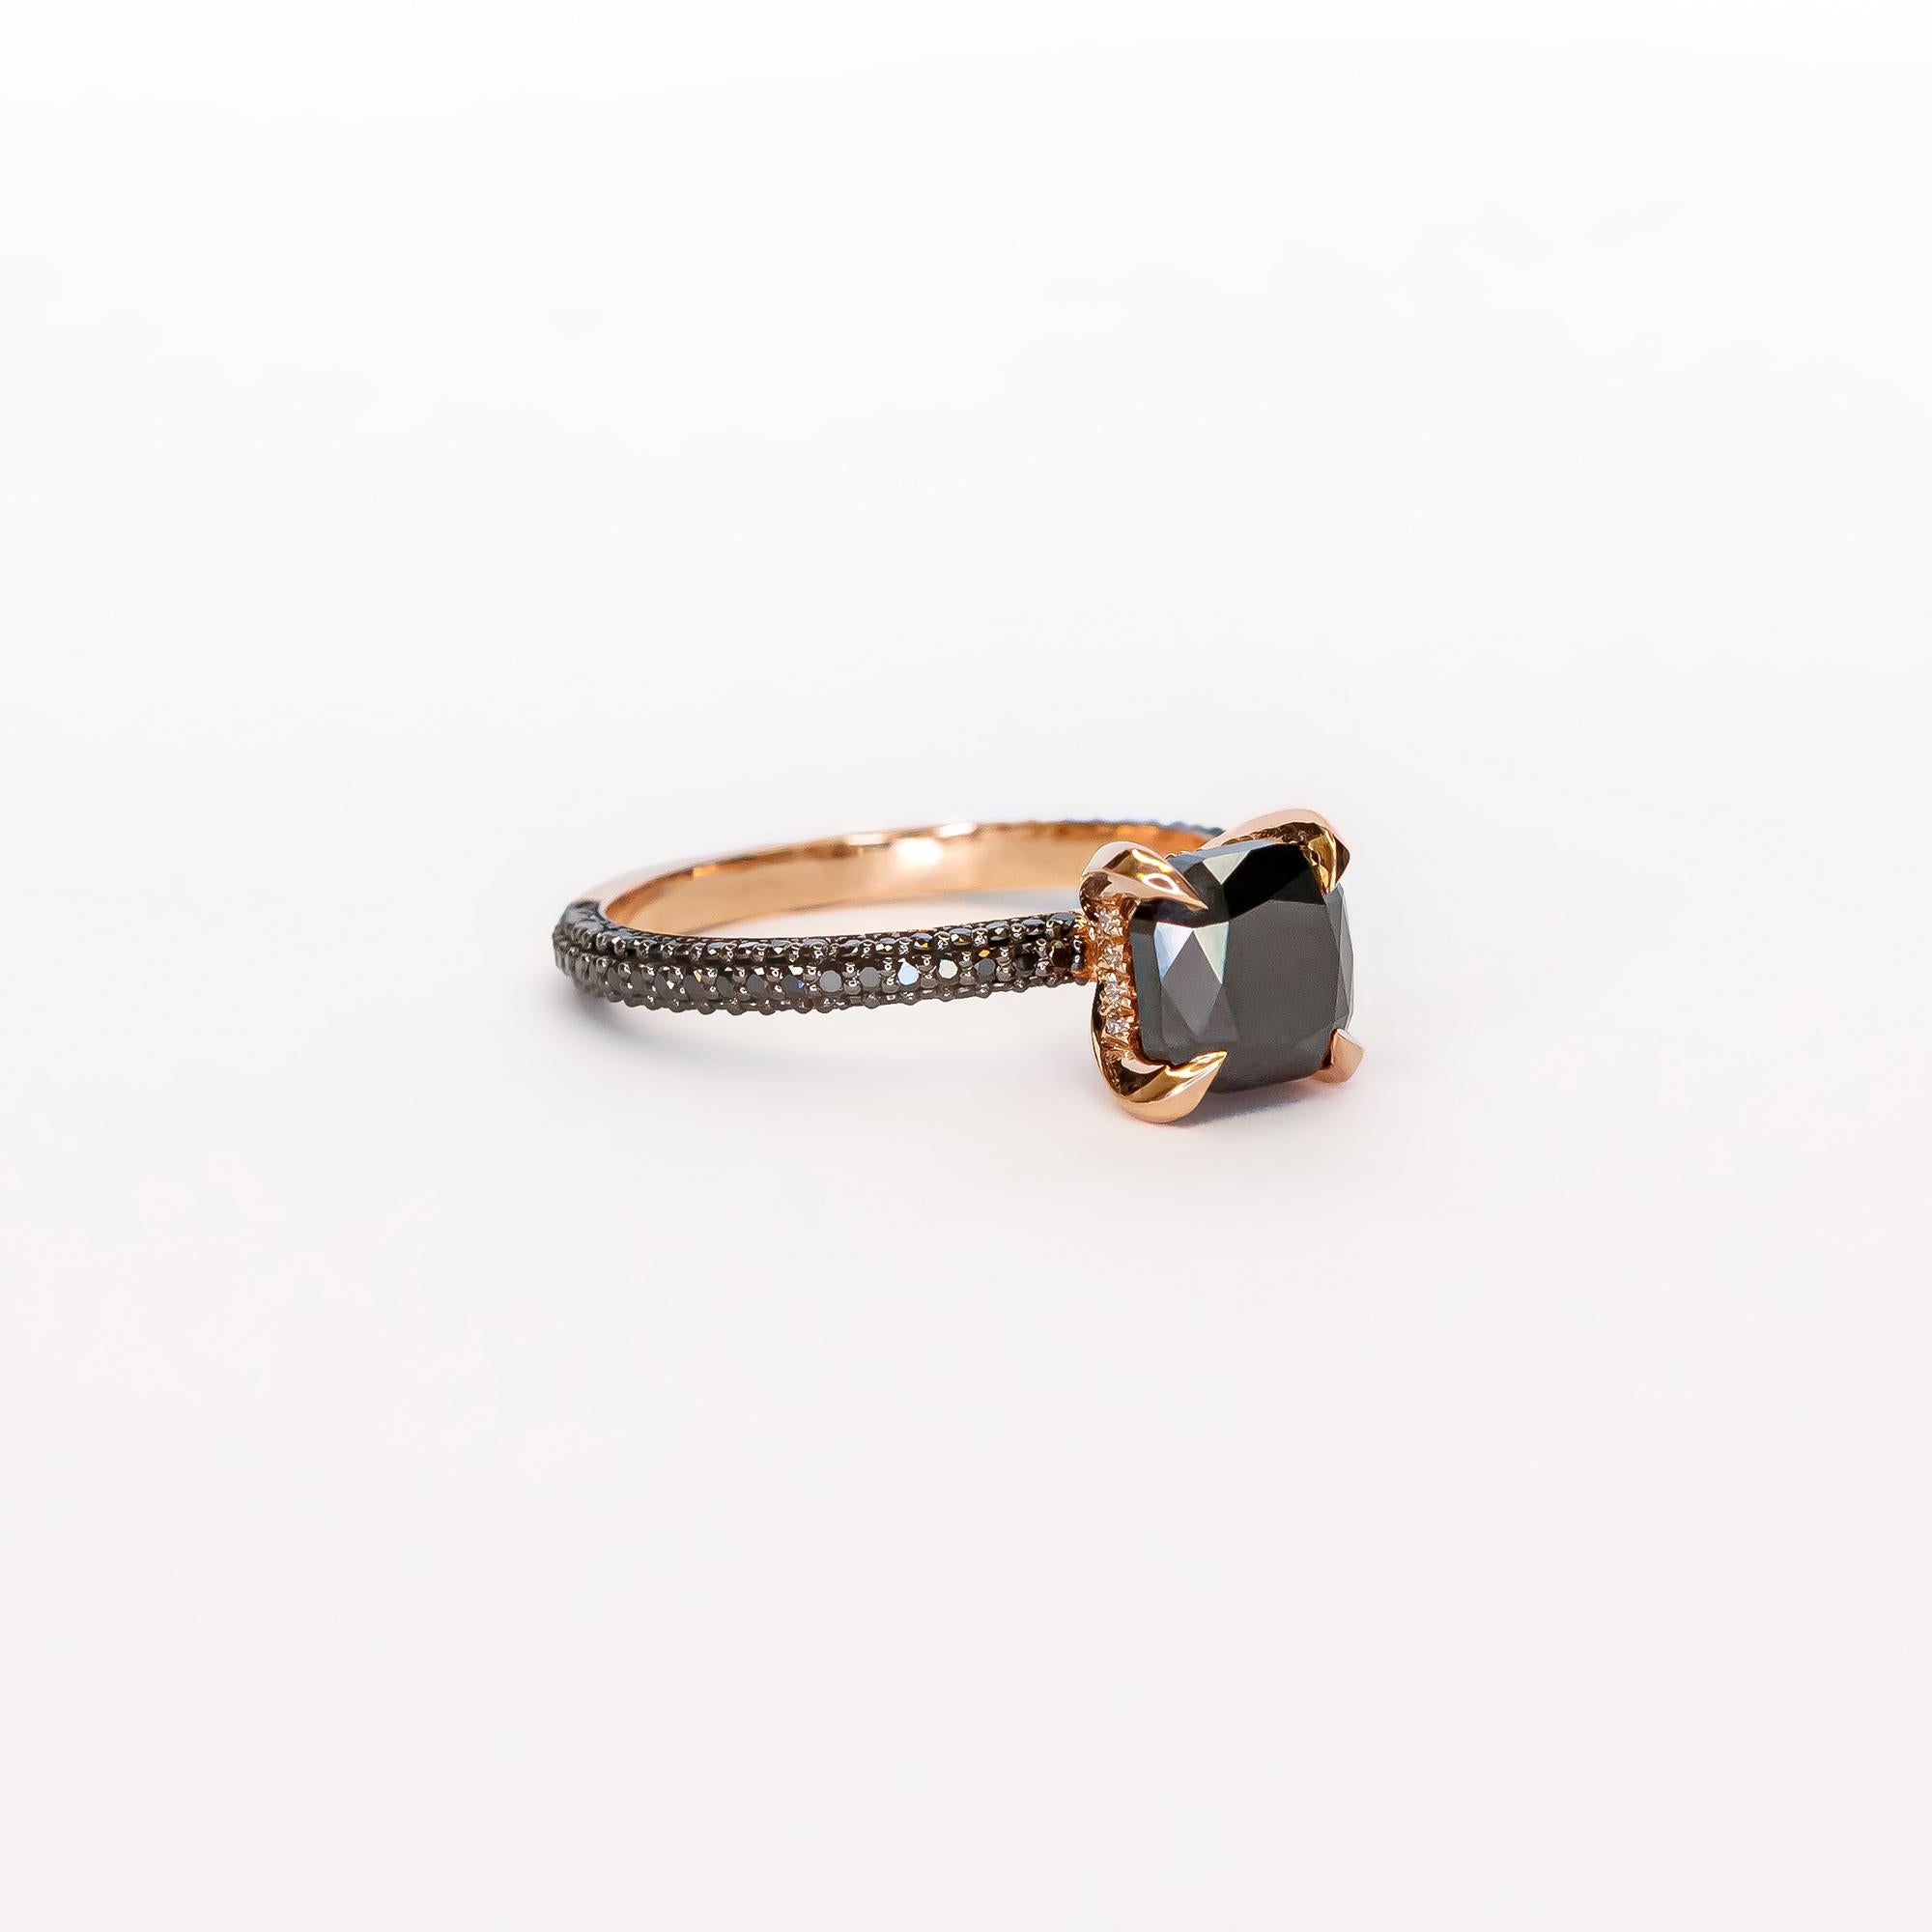 2.5cts Ooak Cushion Cut Natural Black&White Diamond Statement Ring in Rose Gold For Sale 5